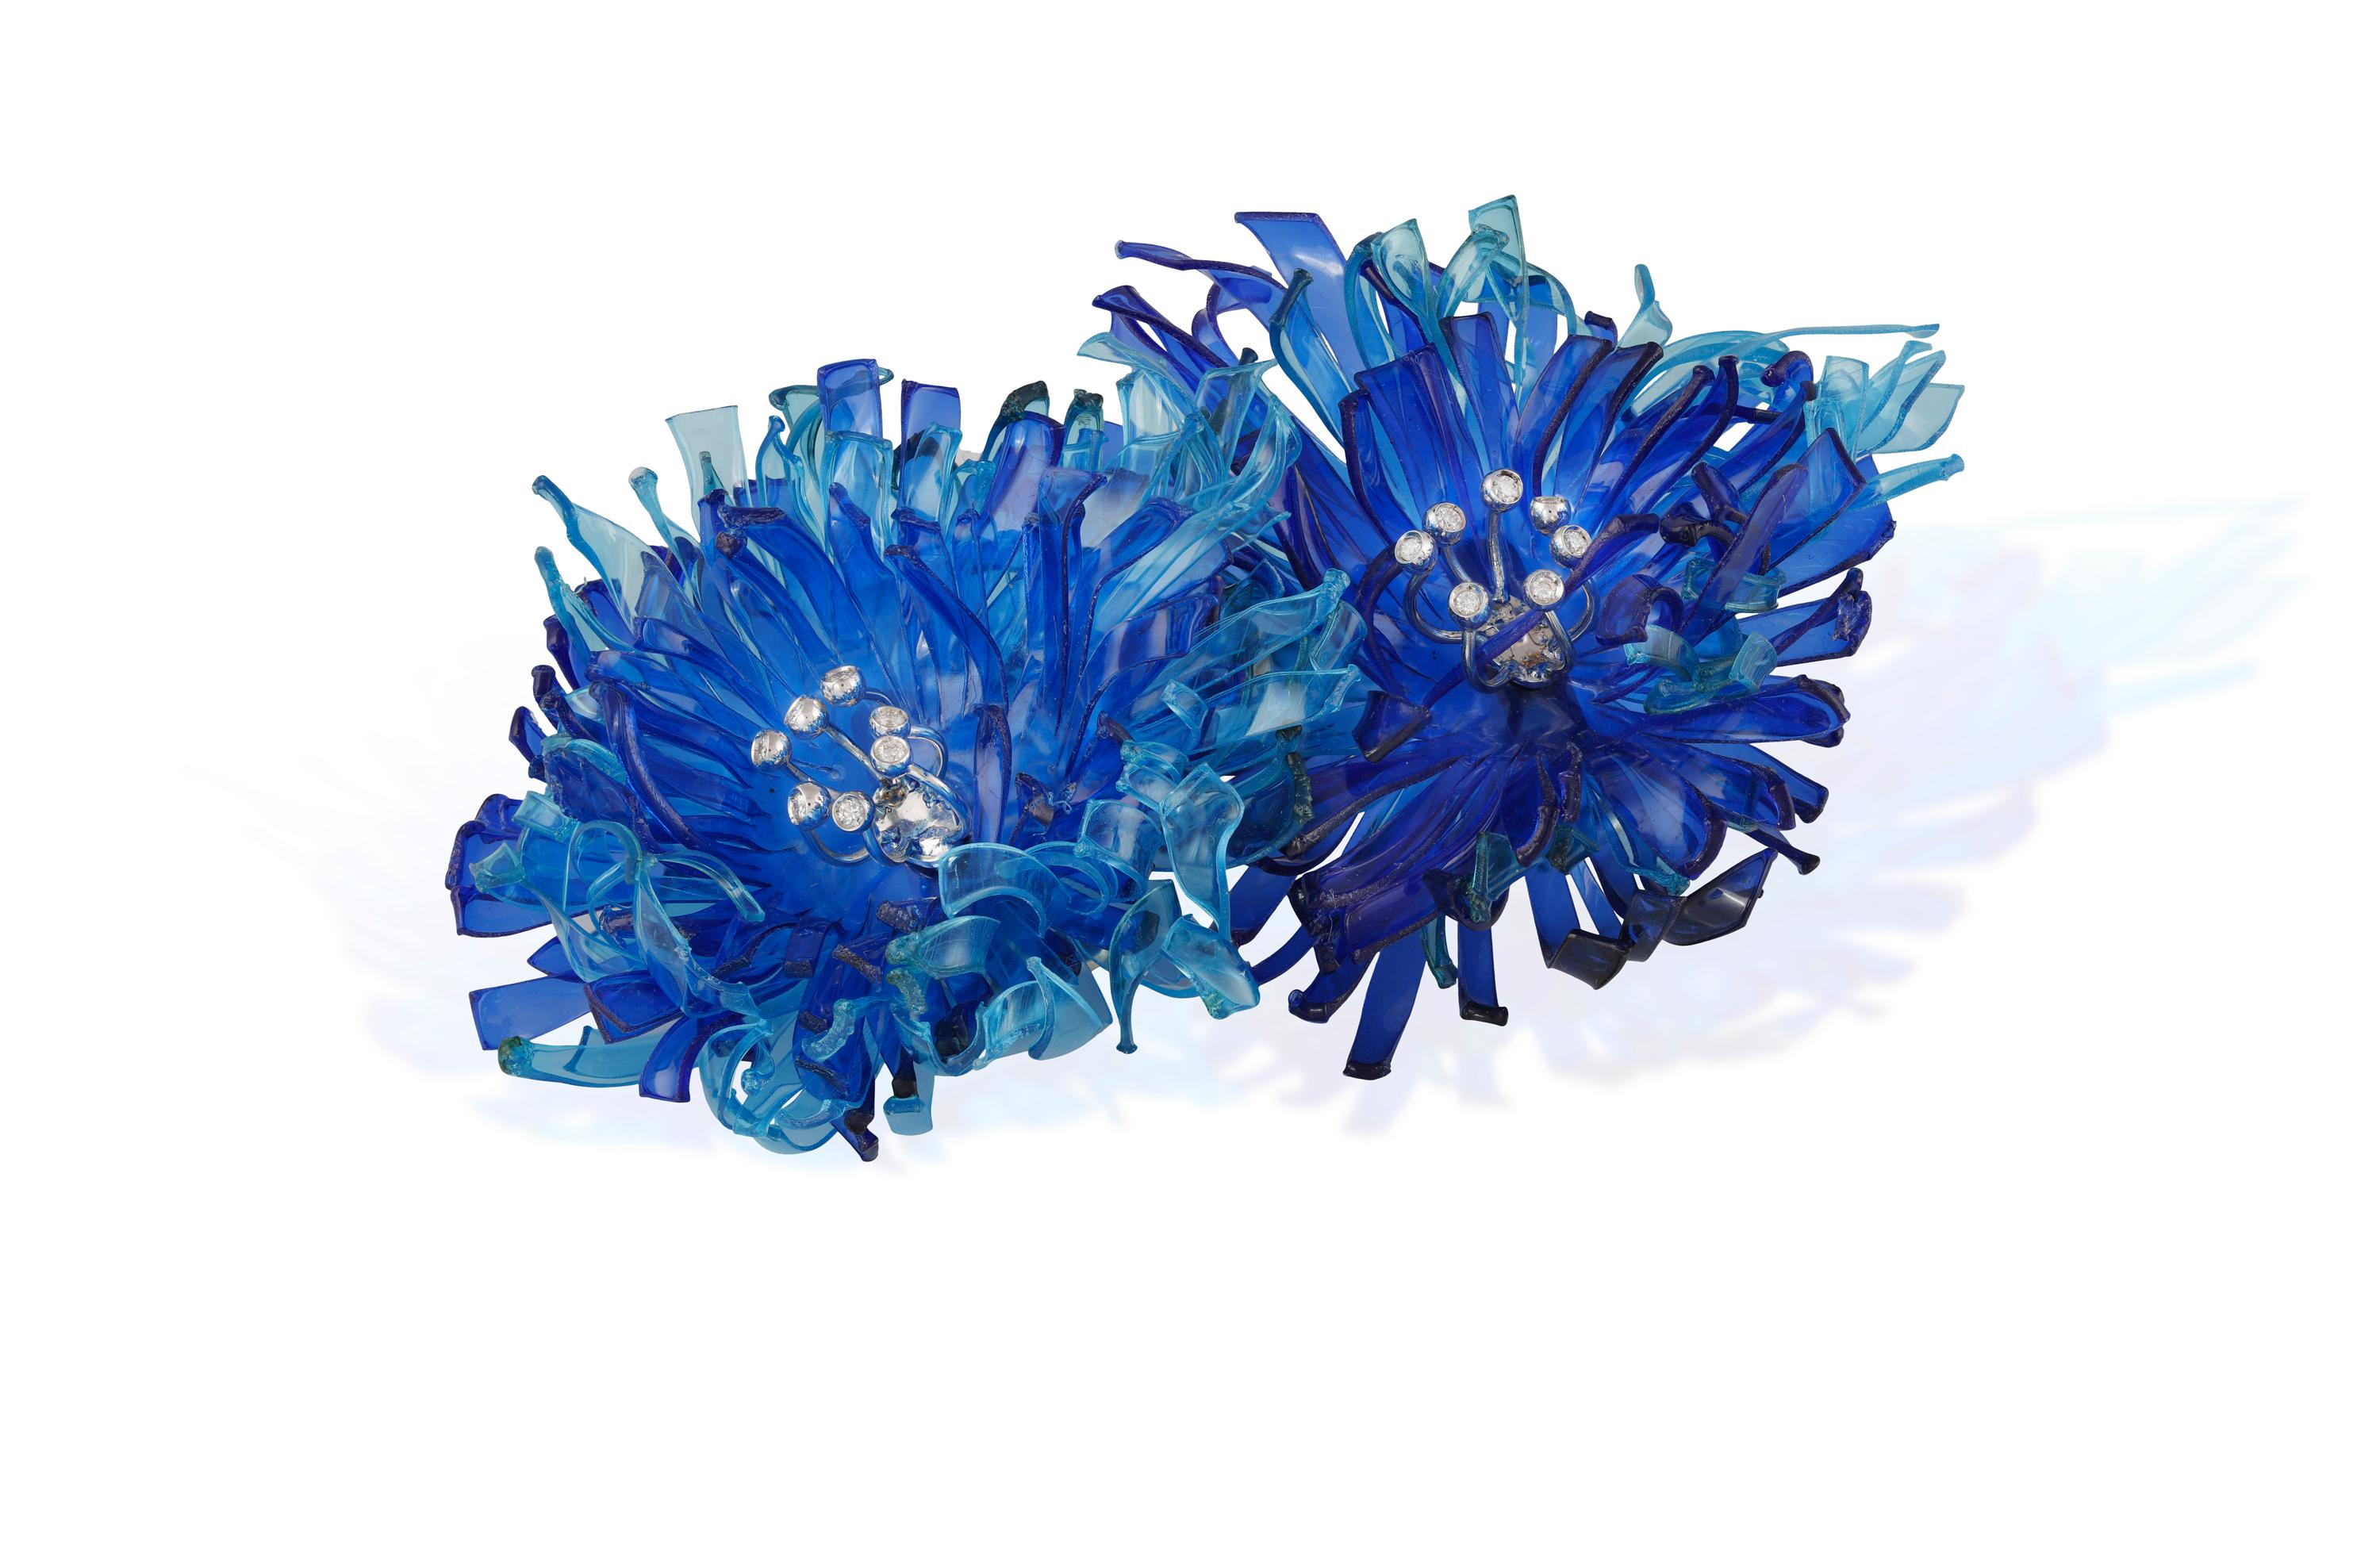 MARGHERITA BURGENER _ ENRICA BORGHI
Precious Plastic Jewels 
Margherita Burgener's creations are born in an artisan workshop in Valenza, birthplace of Italian high jewelry. Every jewel of the brand - 100% made in Italy - tells the special alchemy